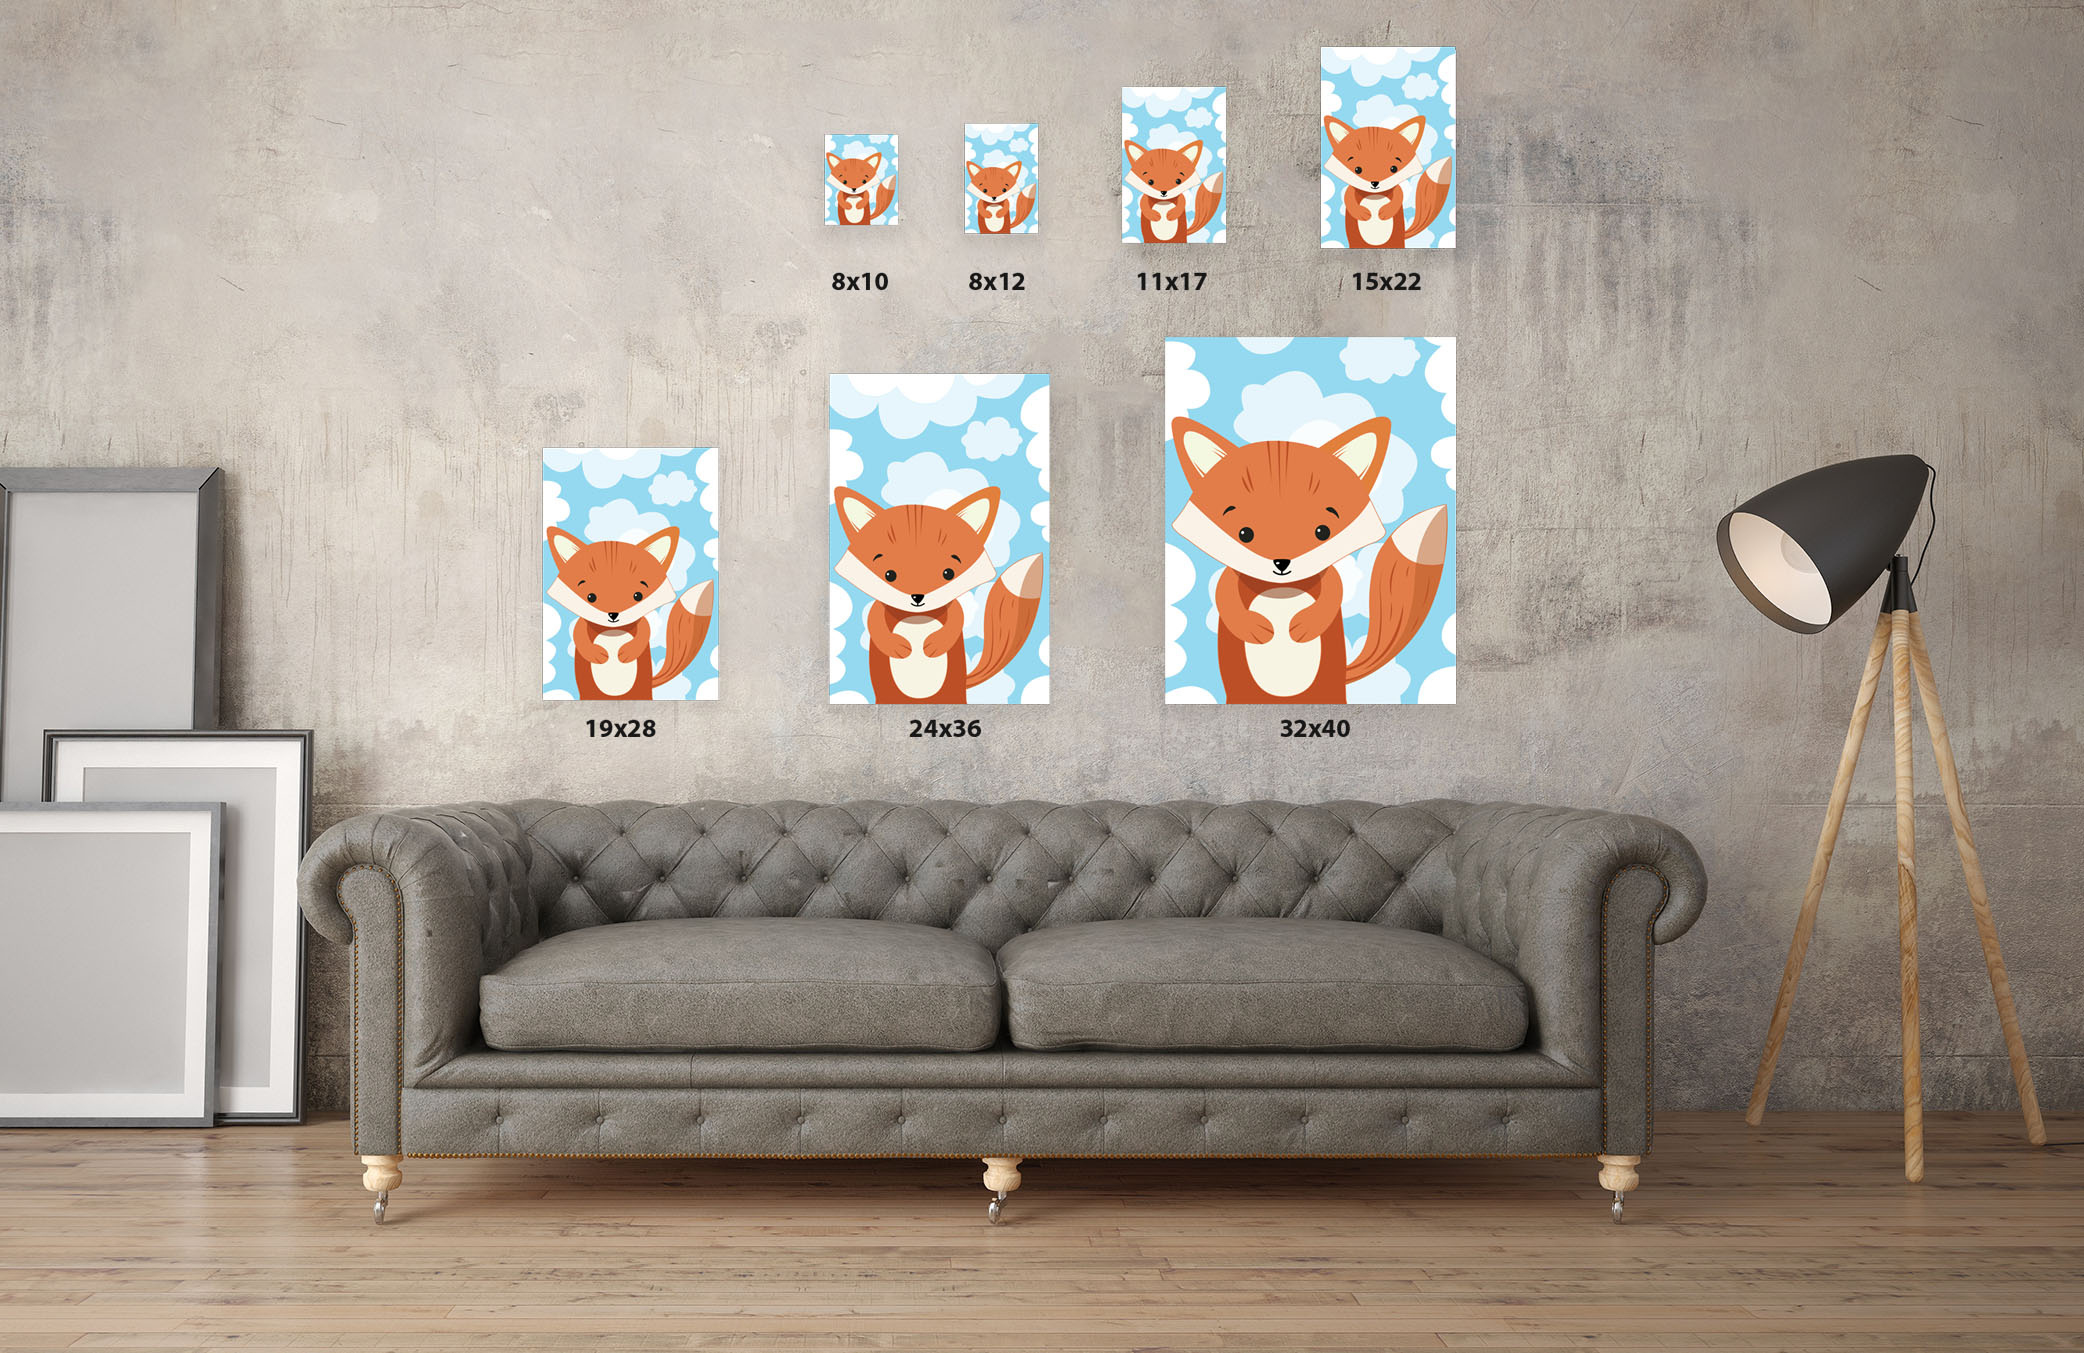 Awkward Styles Fox in Clouds Canvas Art Little Fox Canvas Decor Baby Girl Room Decoration Baby Boy Play Room Wall Art Ready to Hang Artwork for Kids Fox Canvas Illustration Fox Nursery Baby Room - image 2 of 7